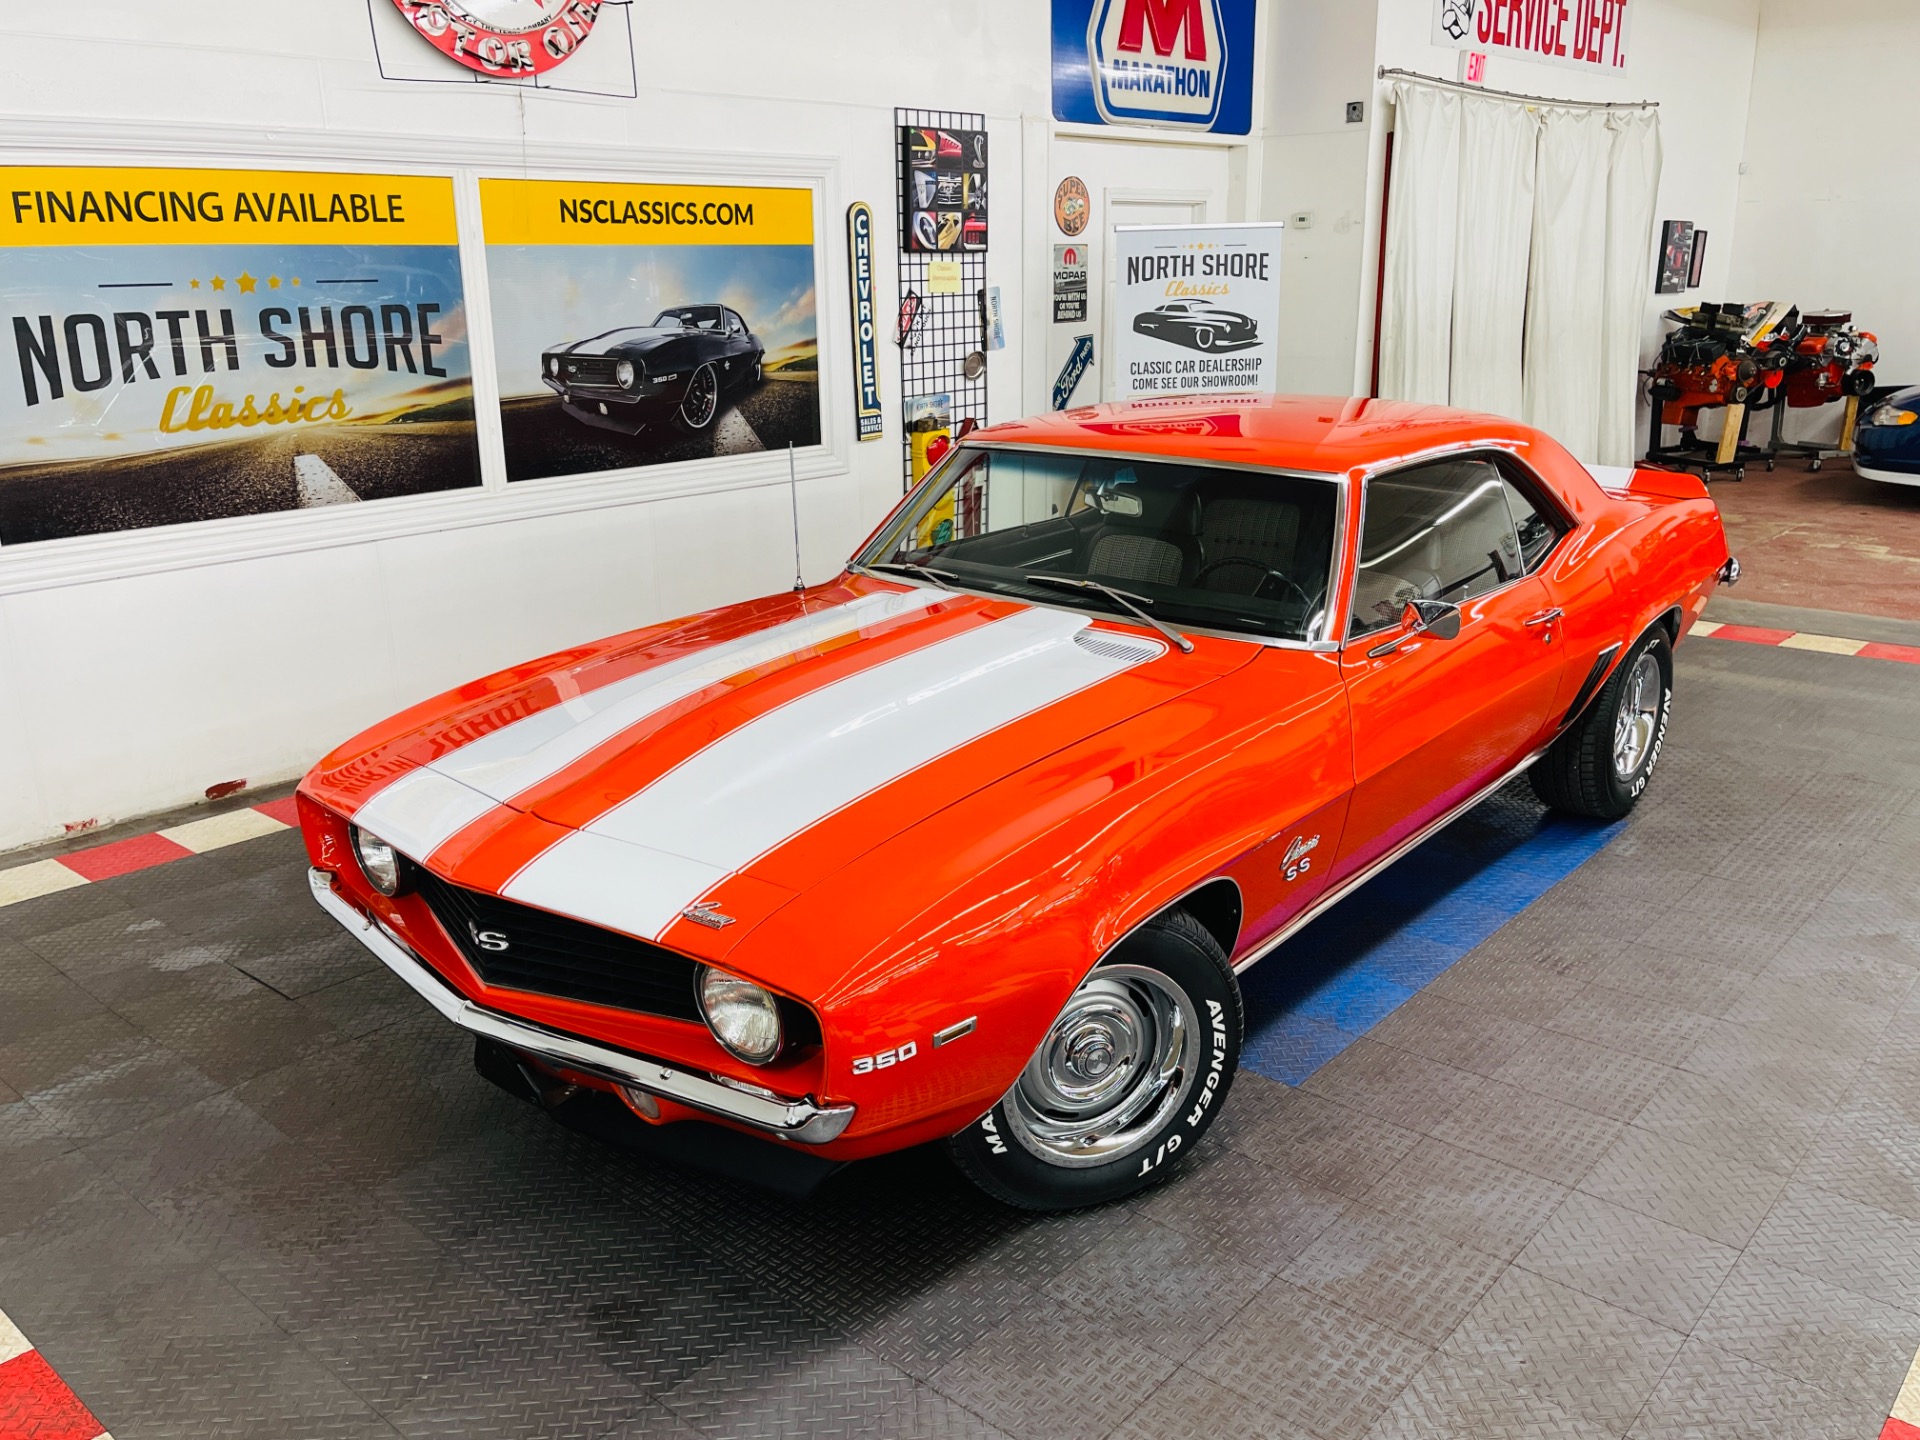 Used 1969 Chevrolet Camaro - SS 350 - HUGGER ORANGE - HOUNDSTOOTH INTERIOR  - SEE VIDEO - For Sale (Sold) | North Shore Classics Stock #69218NSC